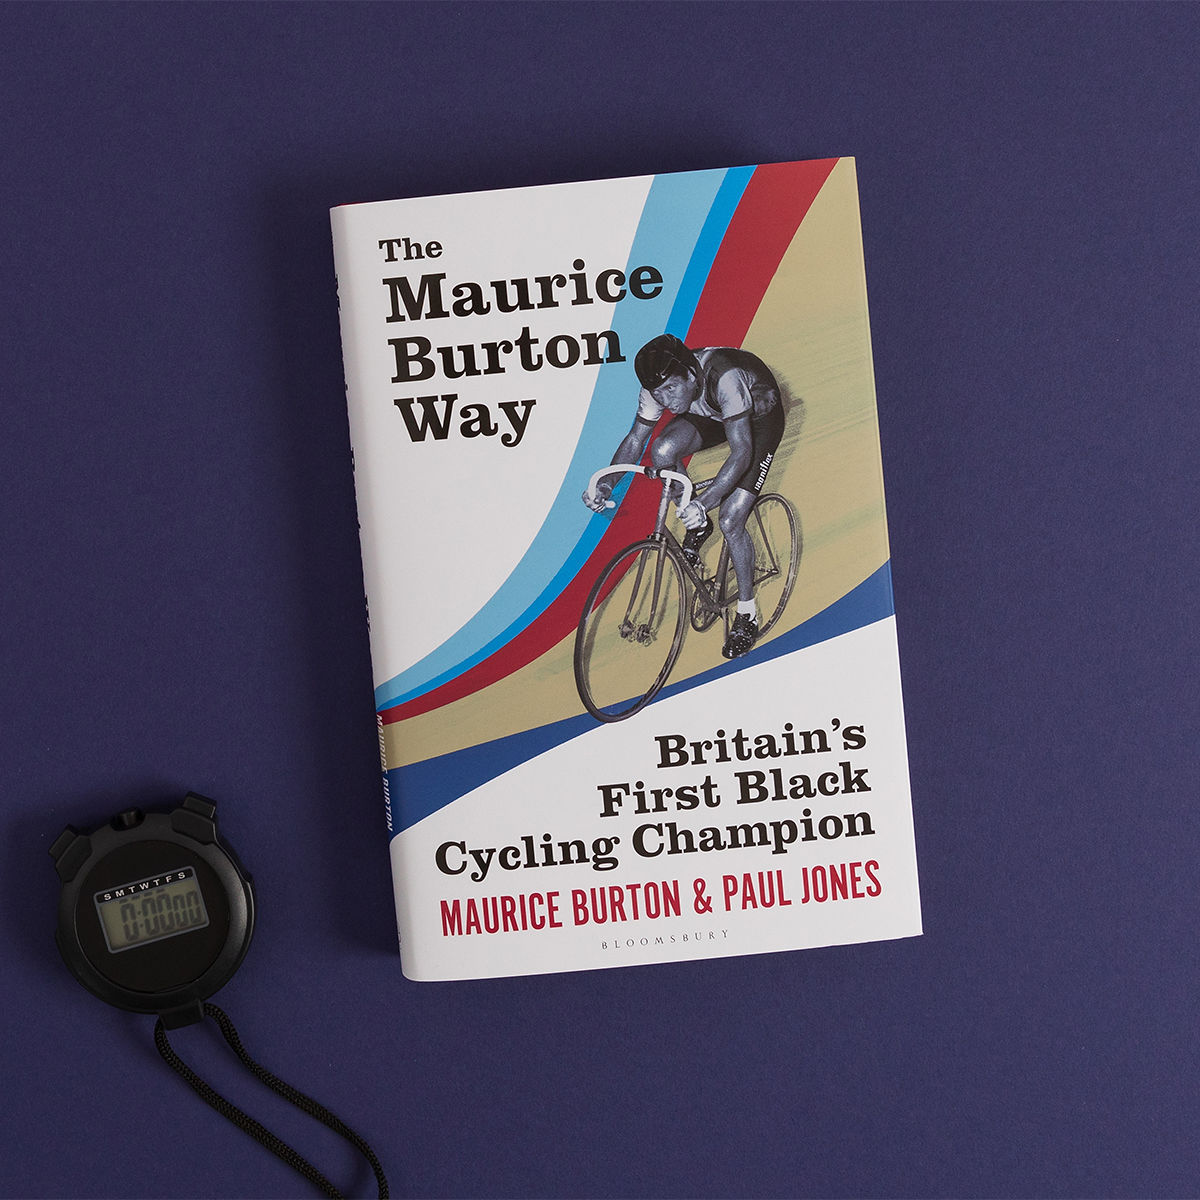 OUT NOW! It's publication day for The Maurice Burton Way – the story of a national sporting legend and role model, waiting to be discovered. @pj_bof @devercycles Order now: amzn.to/49ob95n